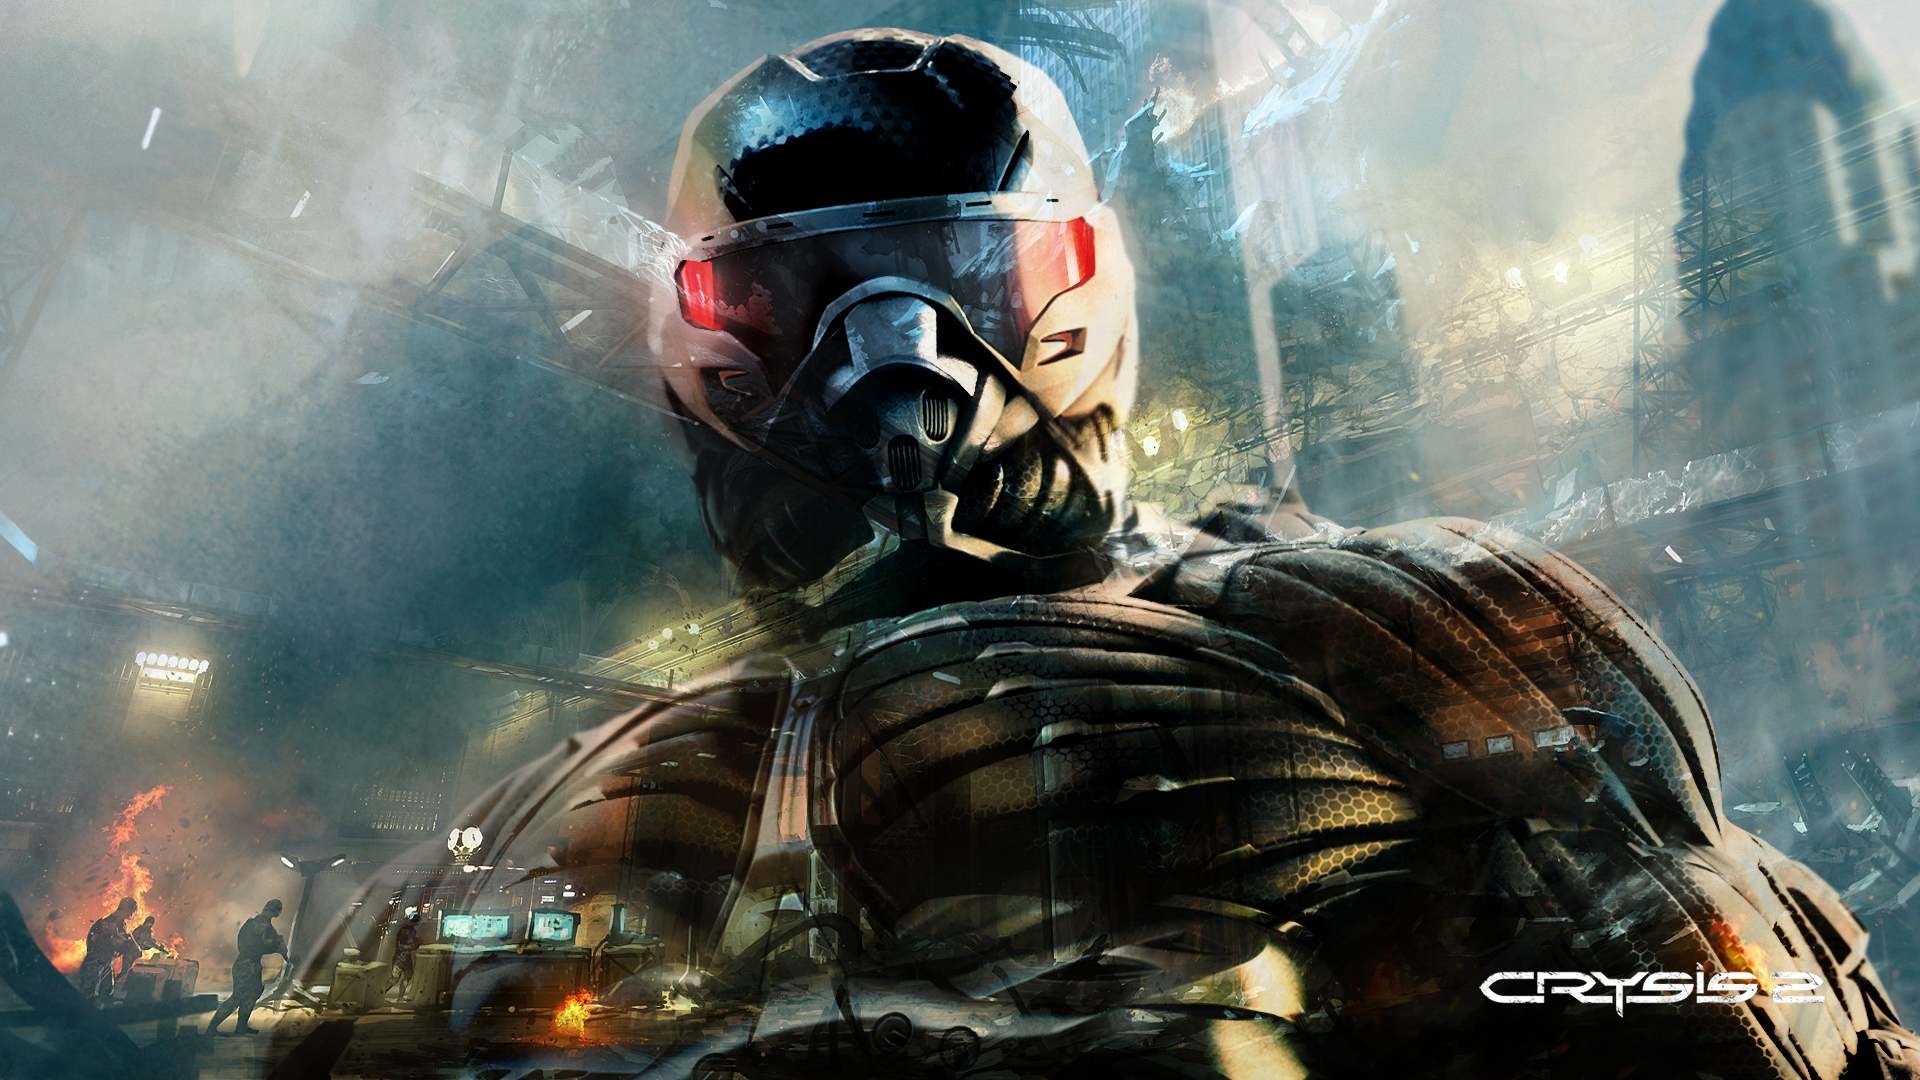 1920x1080, Crysis, Game, Widescreen, High, Definition, - Background Crysis Hd - HD Wallpaper 